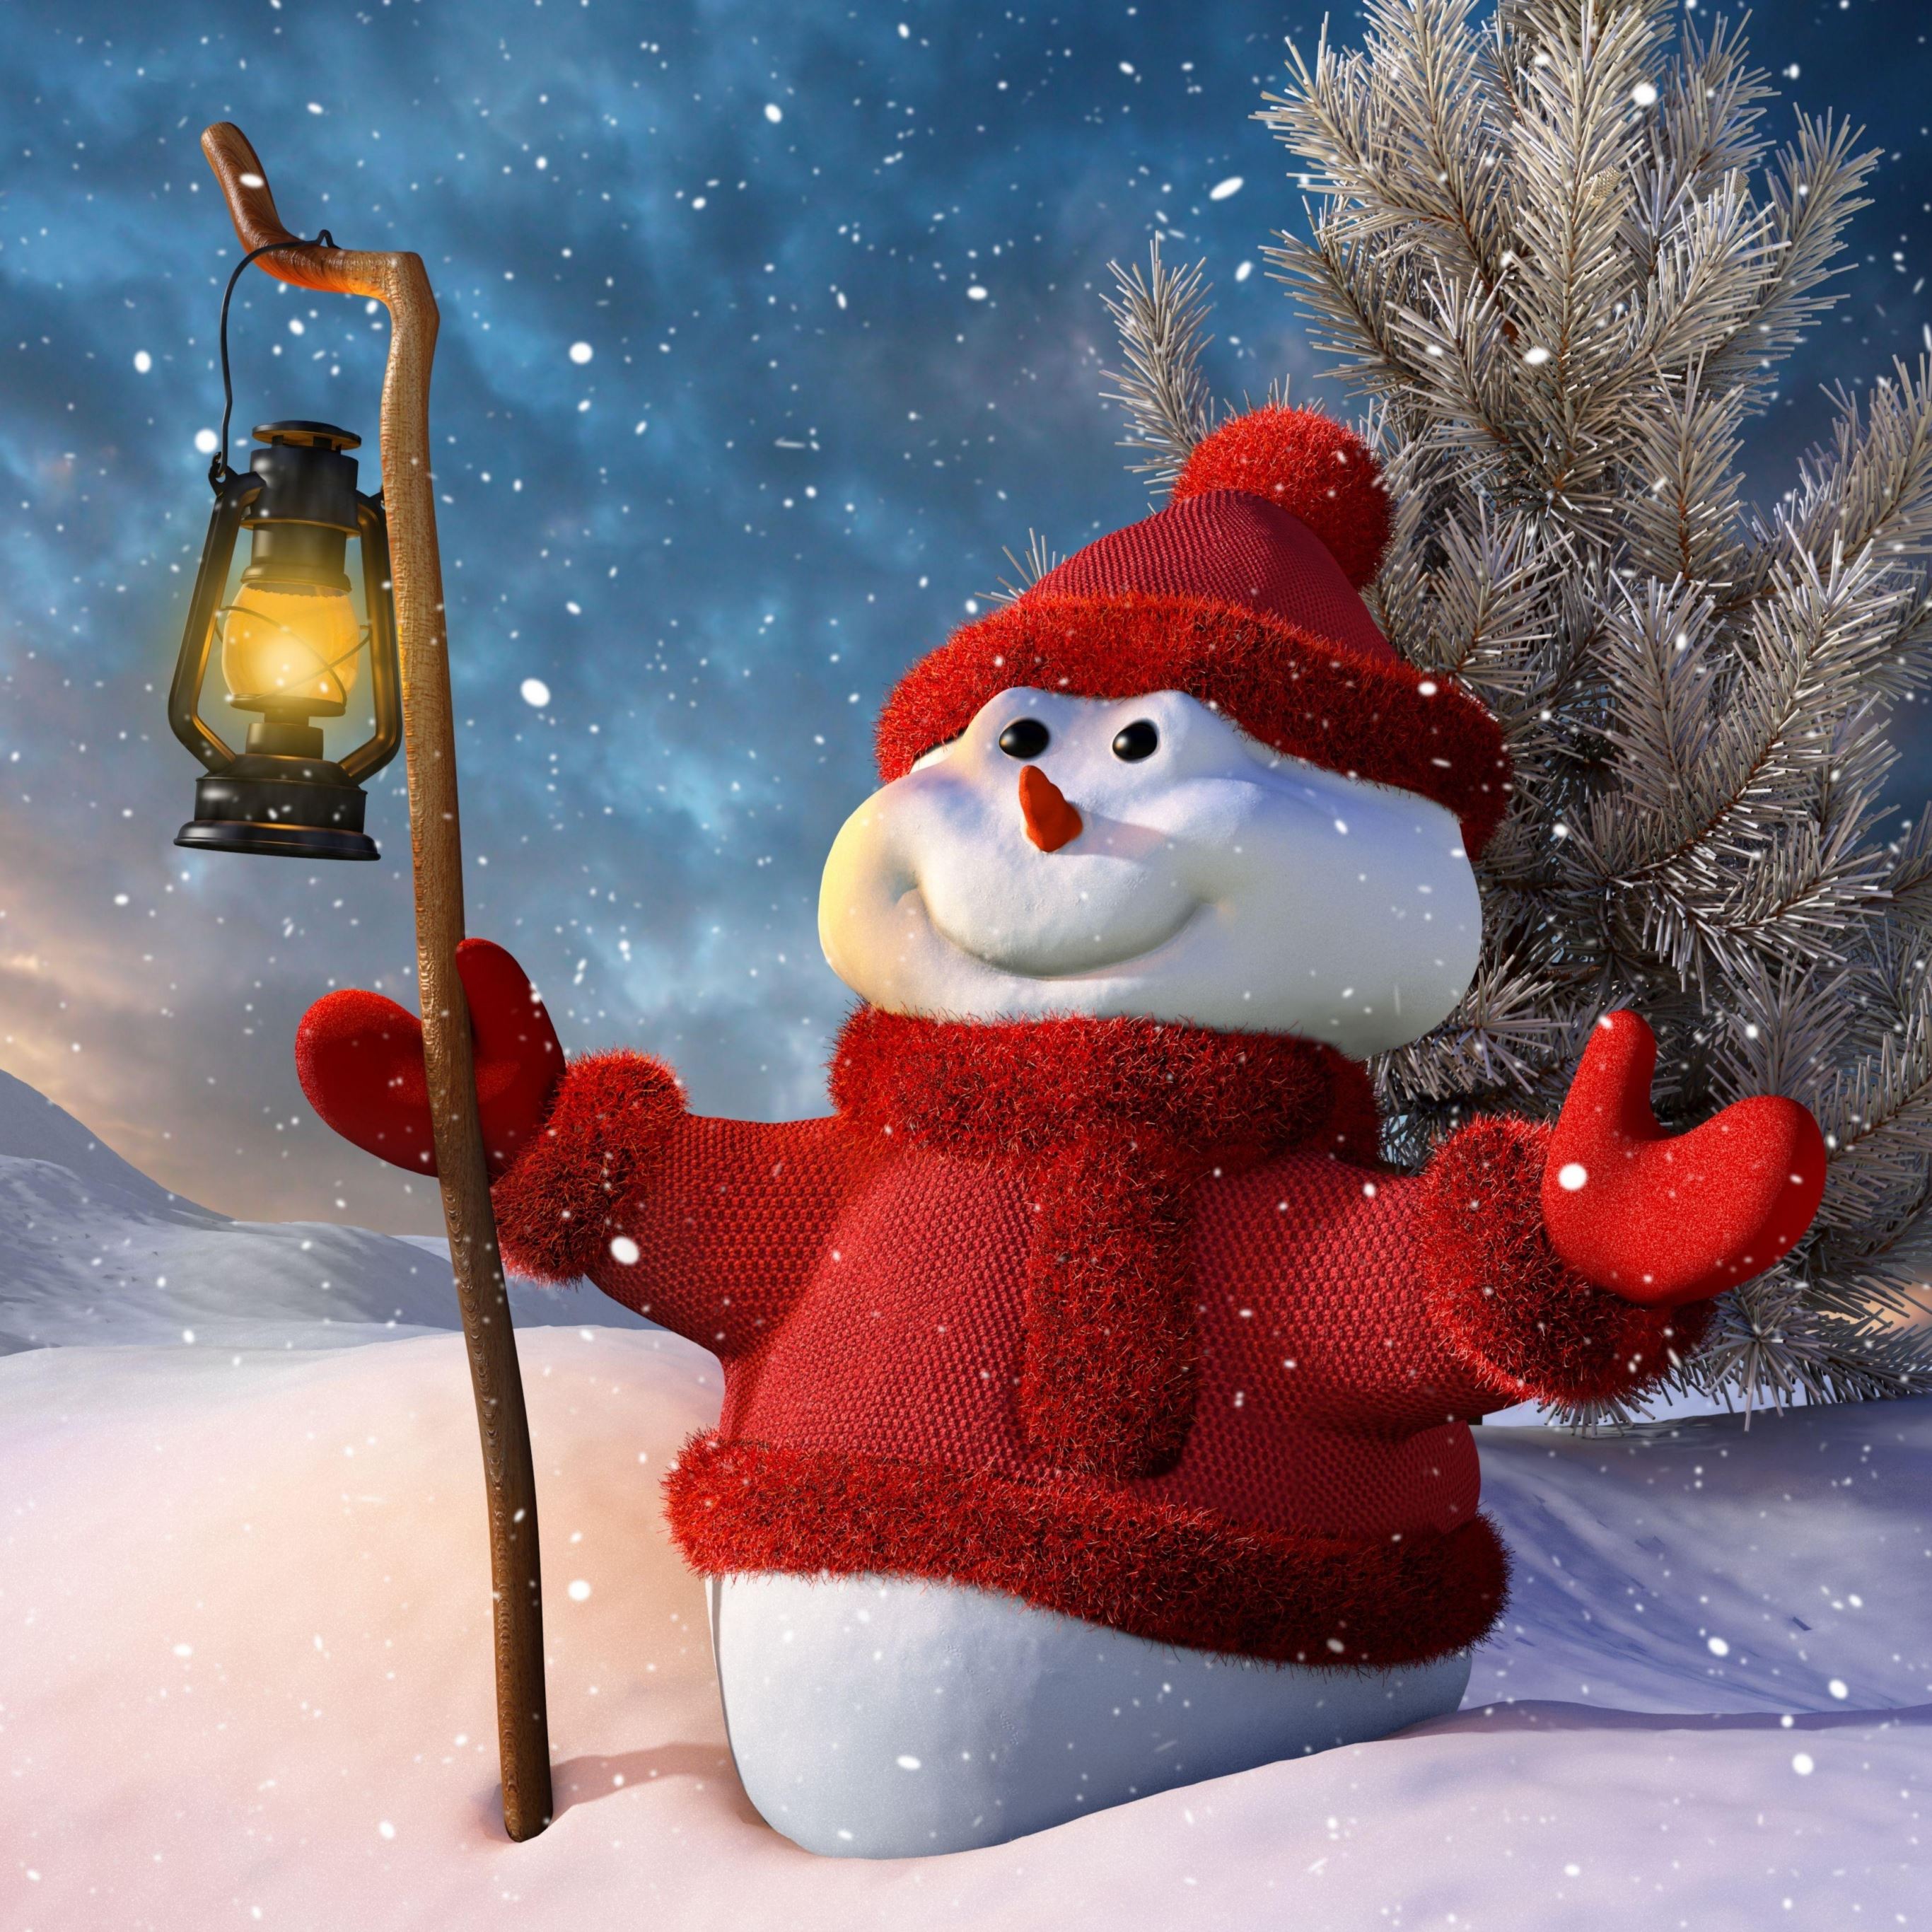 Christmas snowman iPad Pro Wallpapers Free Download